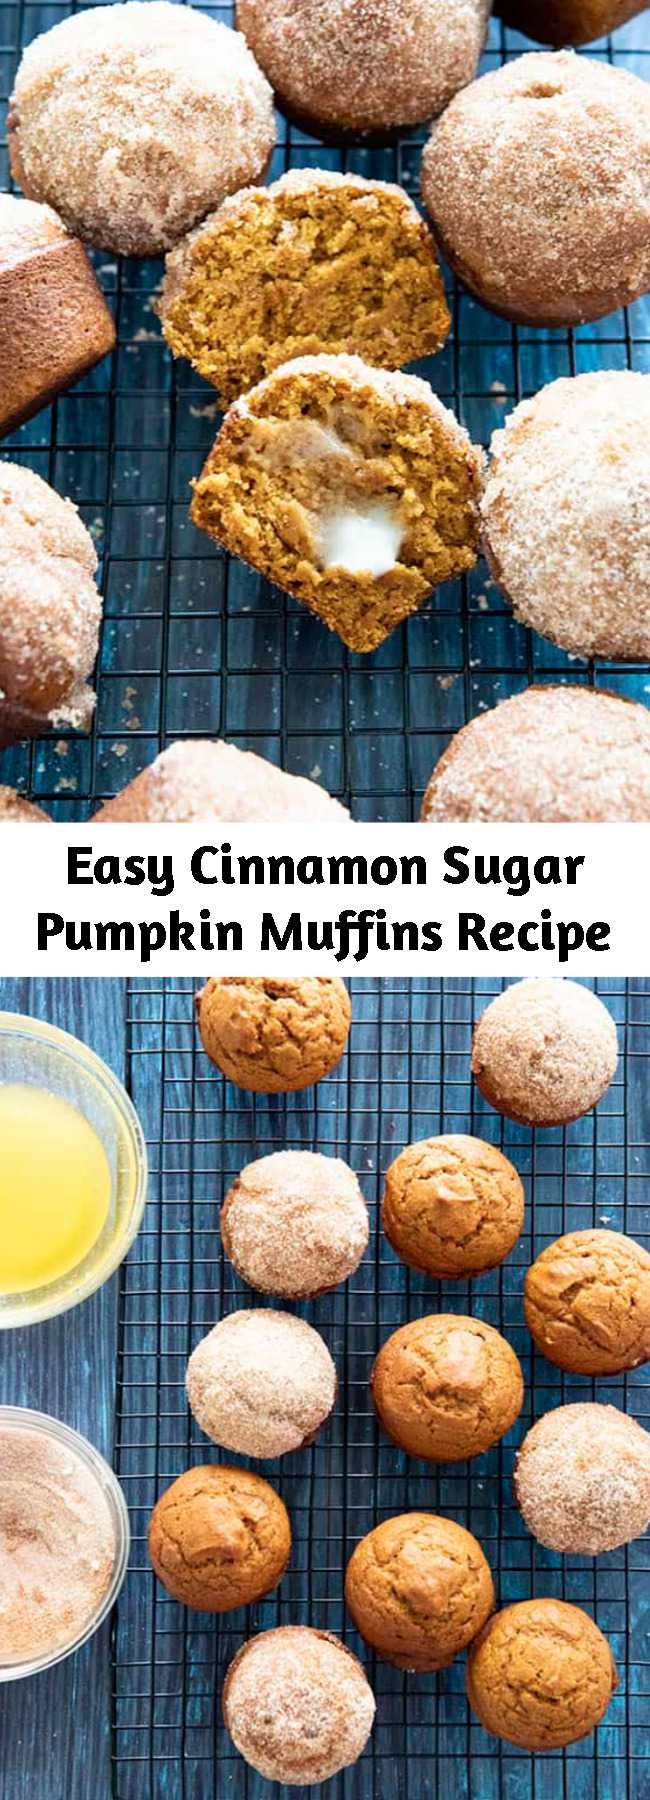 Easy Cinnamon Sugar Pumpkin Muffins Recipe - The Best Pumpkin Muffins that are so tender, easy,  and packed with pumpkin spice flavor!  You'll love dipping in melted butter and rolling in cinnamon sugar!